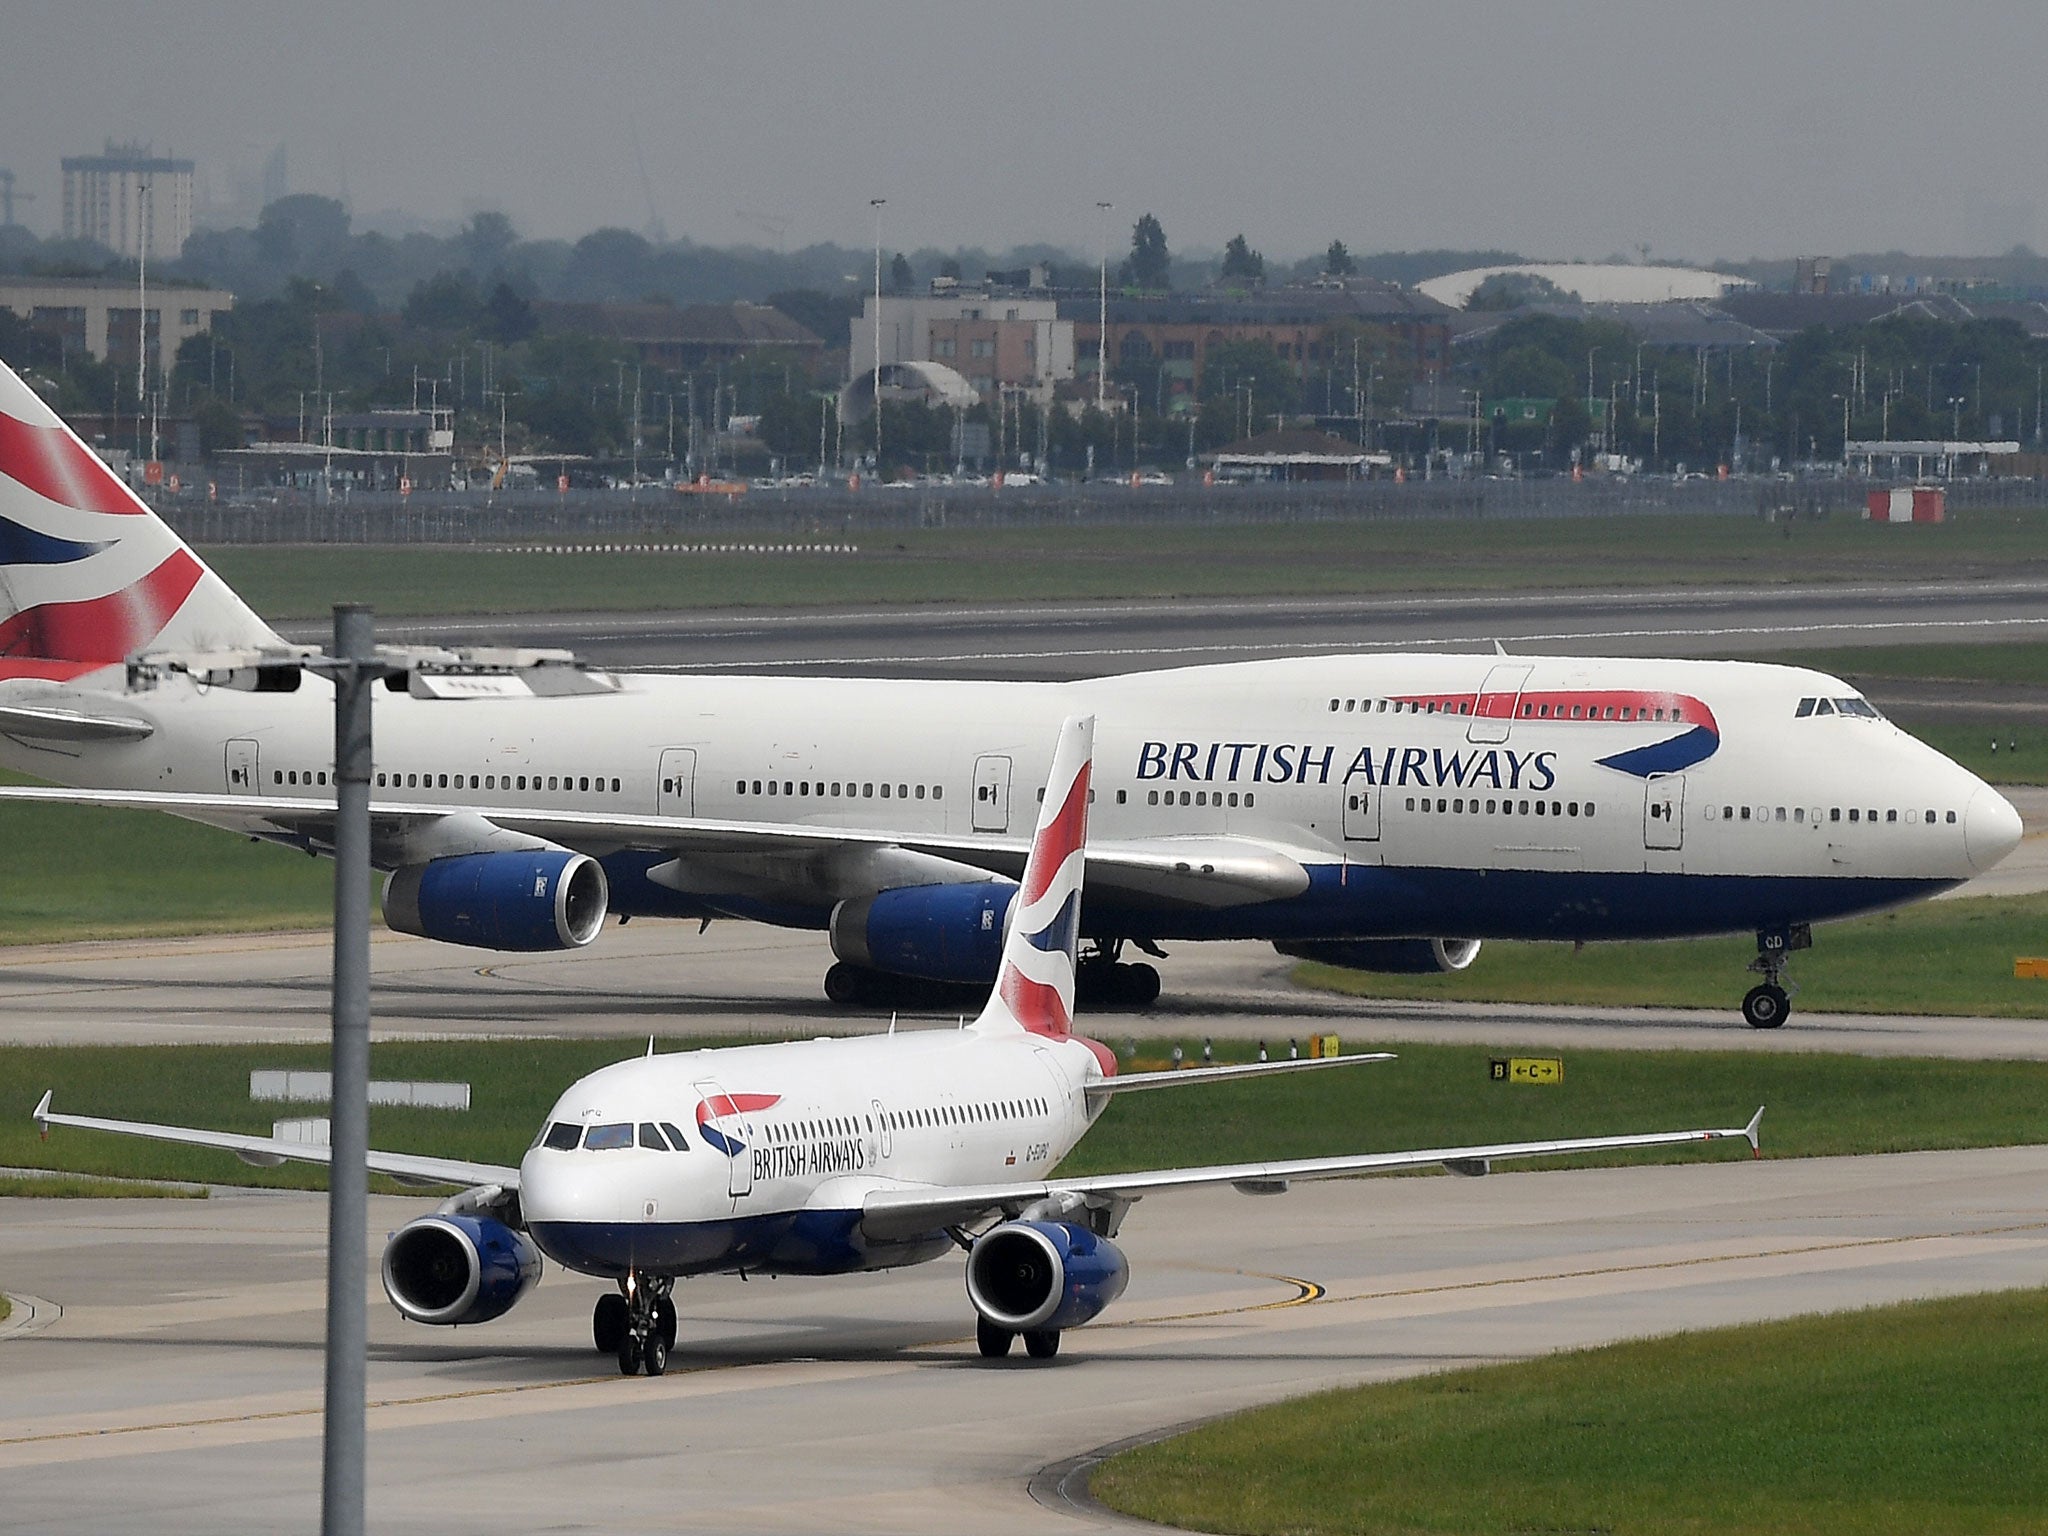 BA passengers continue to be affected by missing baggage after the three-day system crash